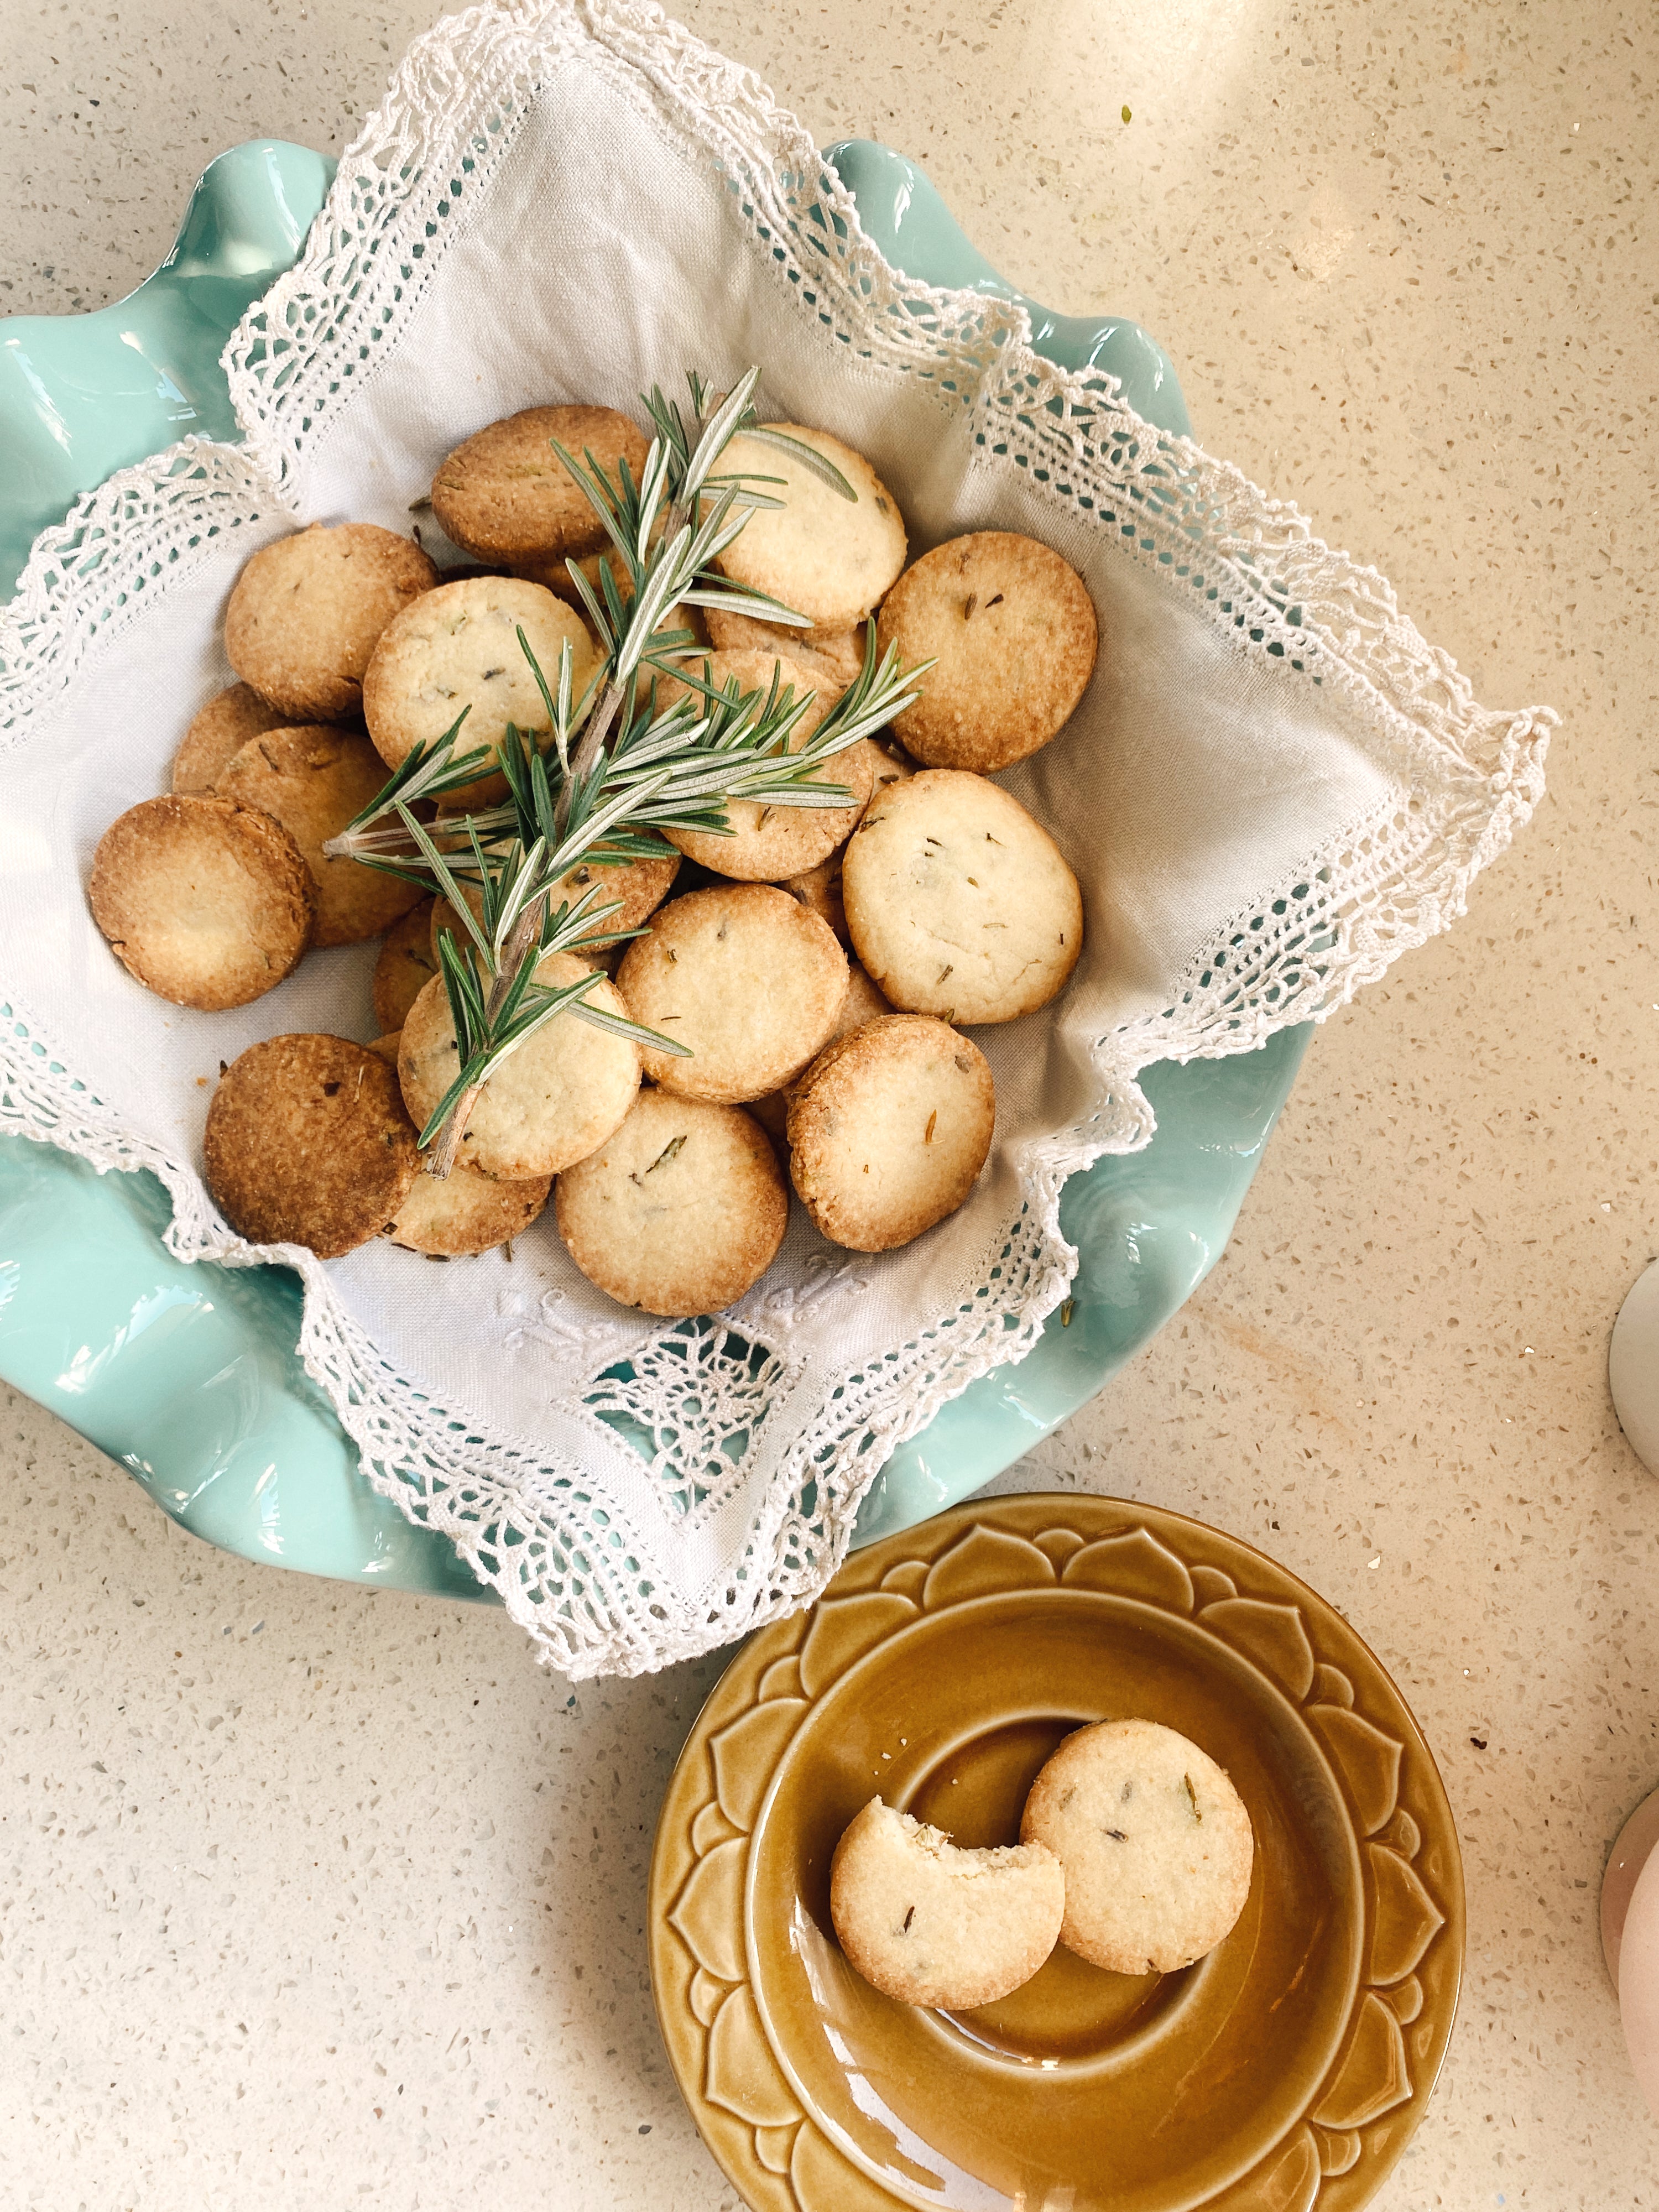 Bake with us: Rosemary Shortbread